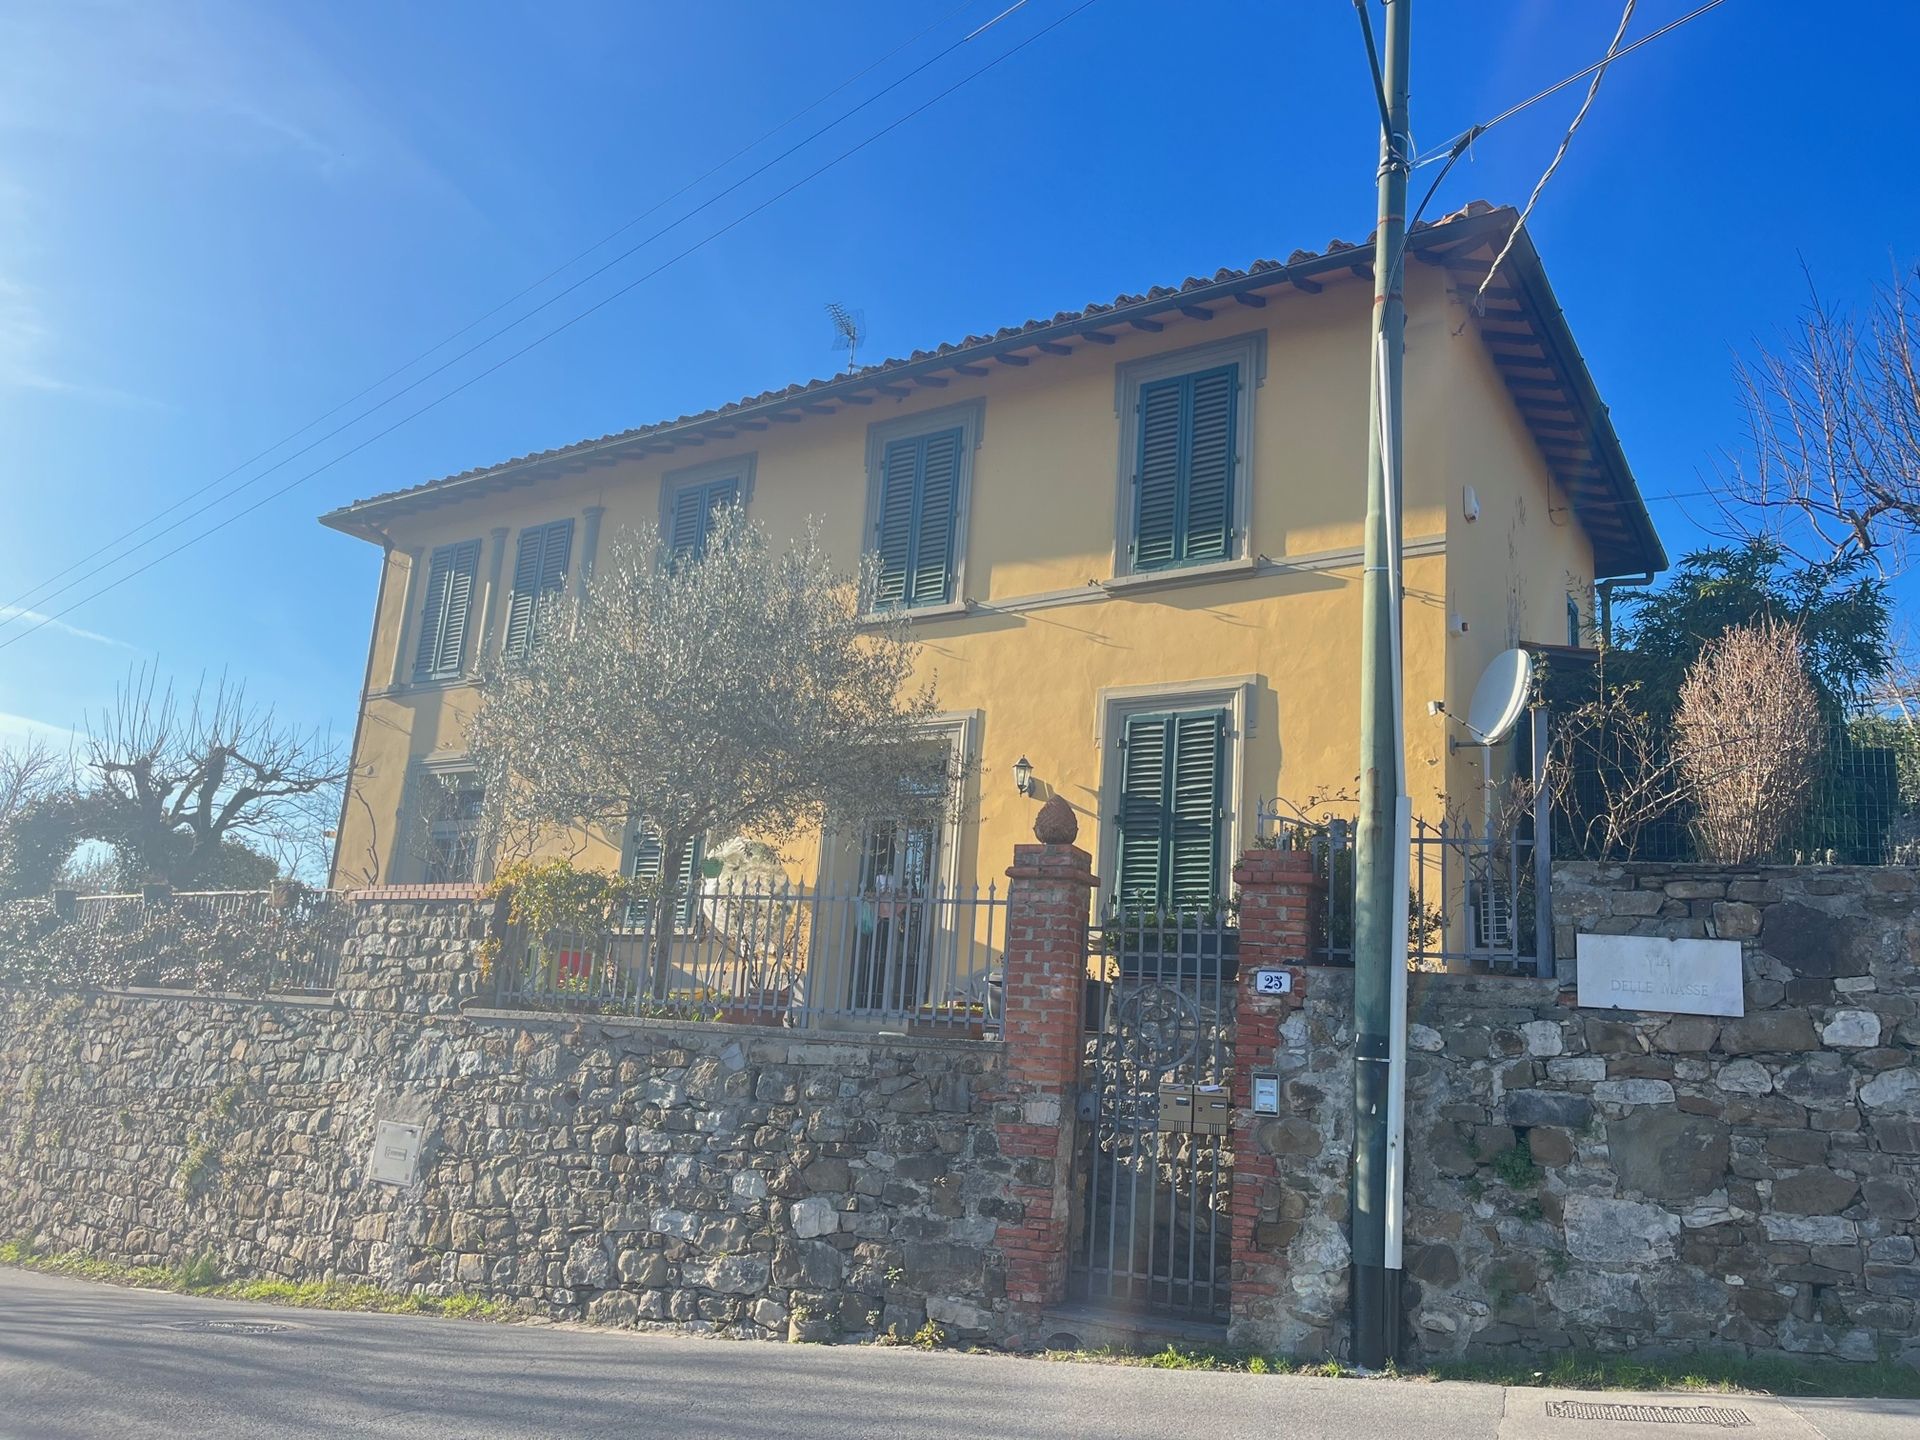 For sale villa in city Firenze Toscana